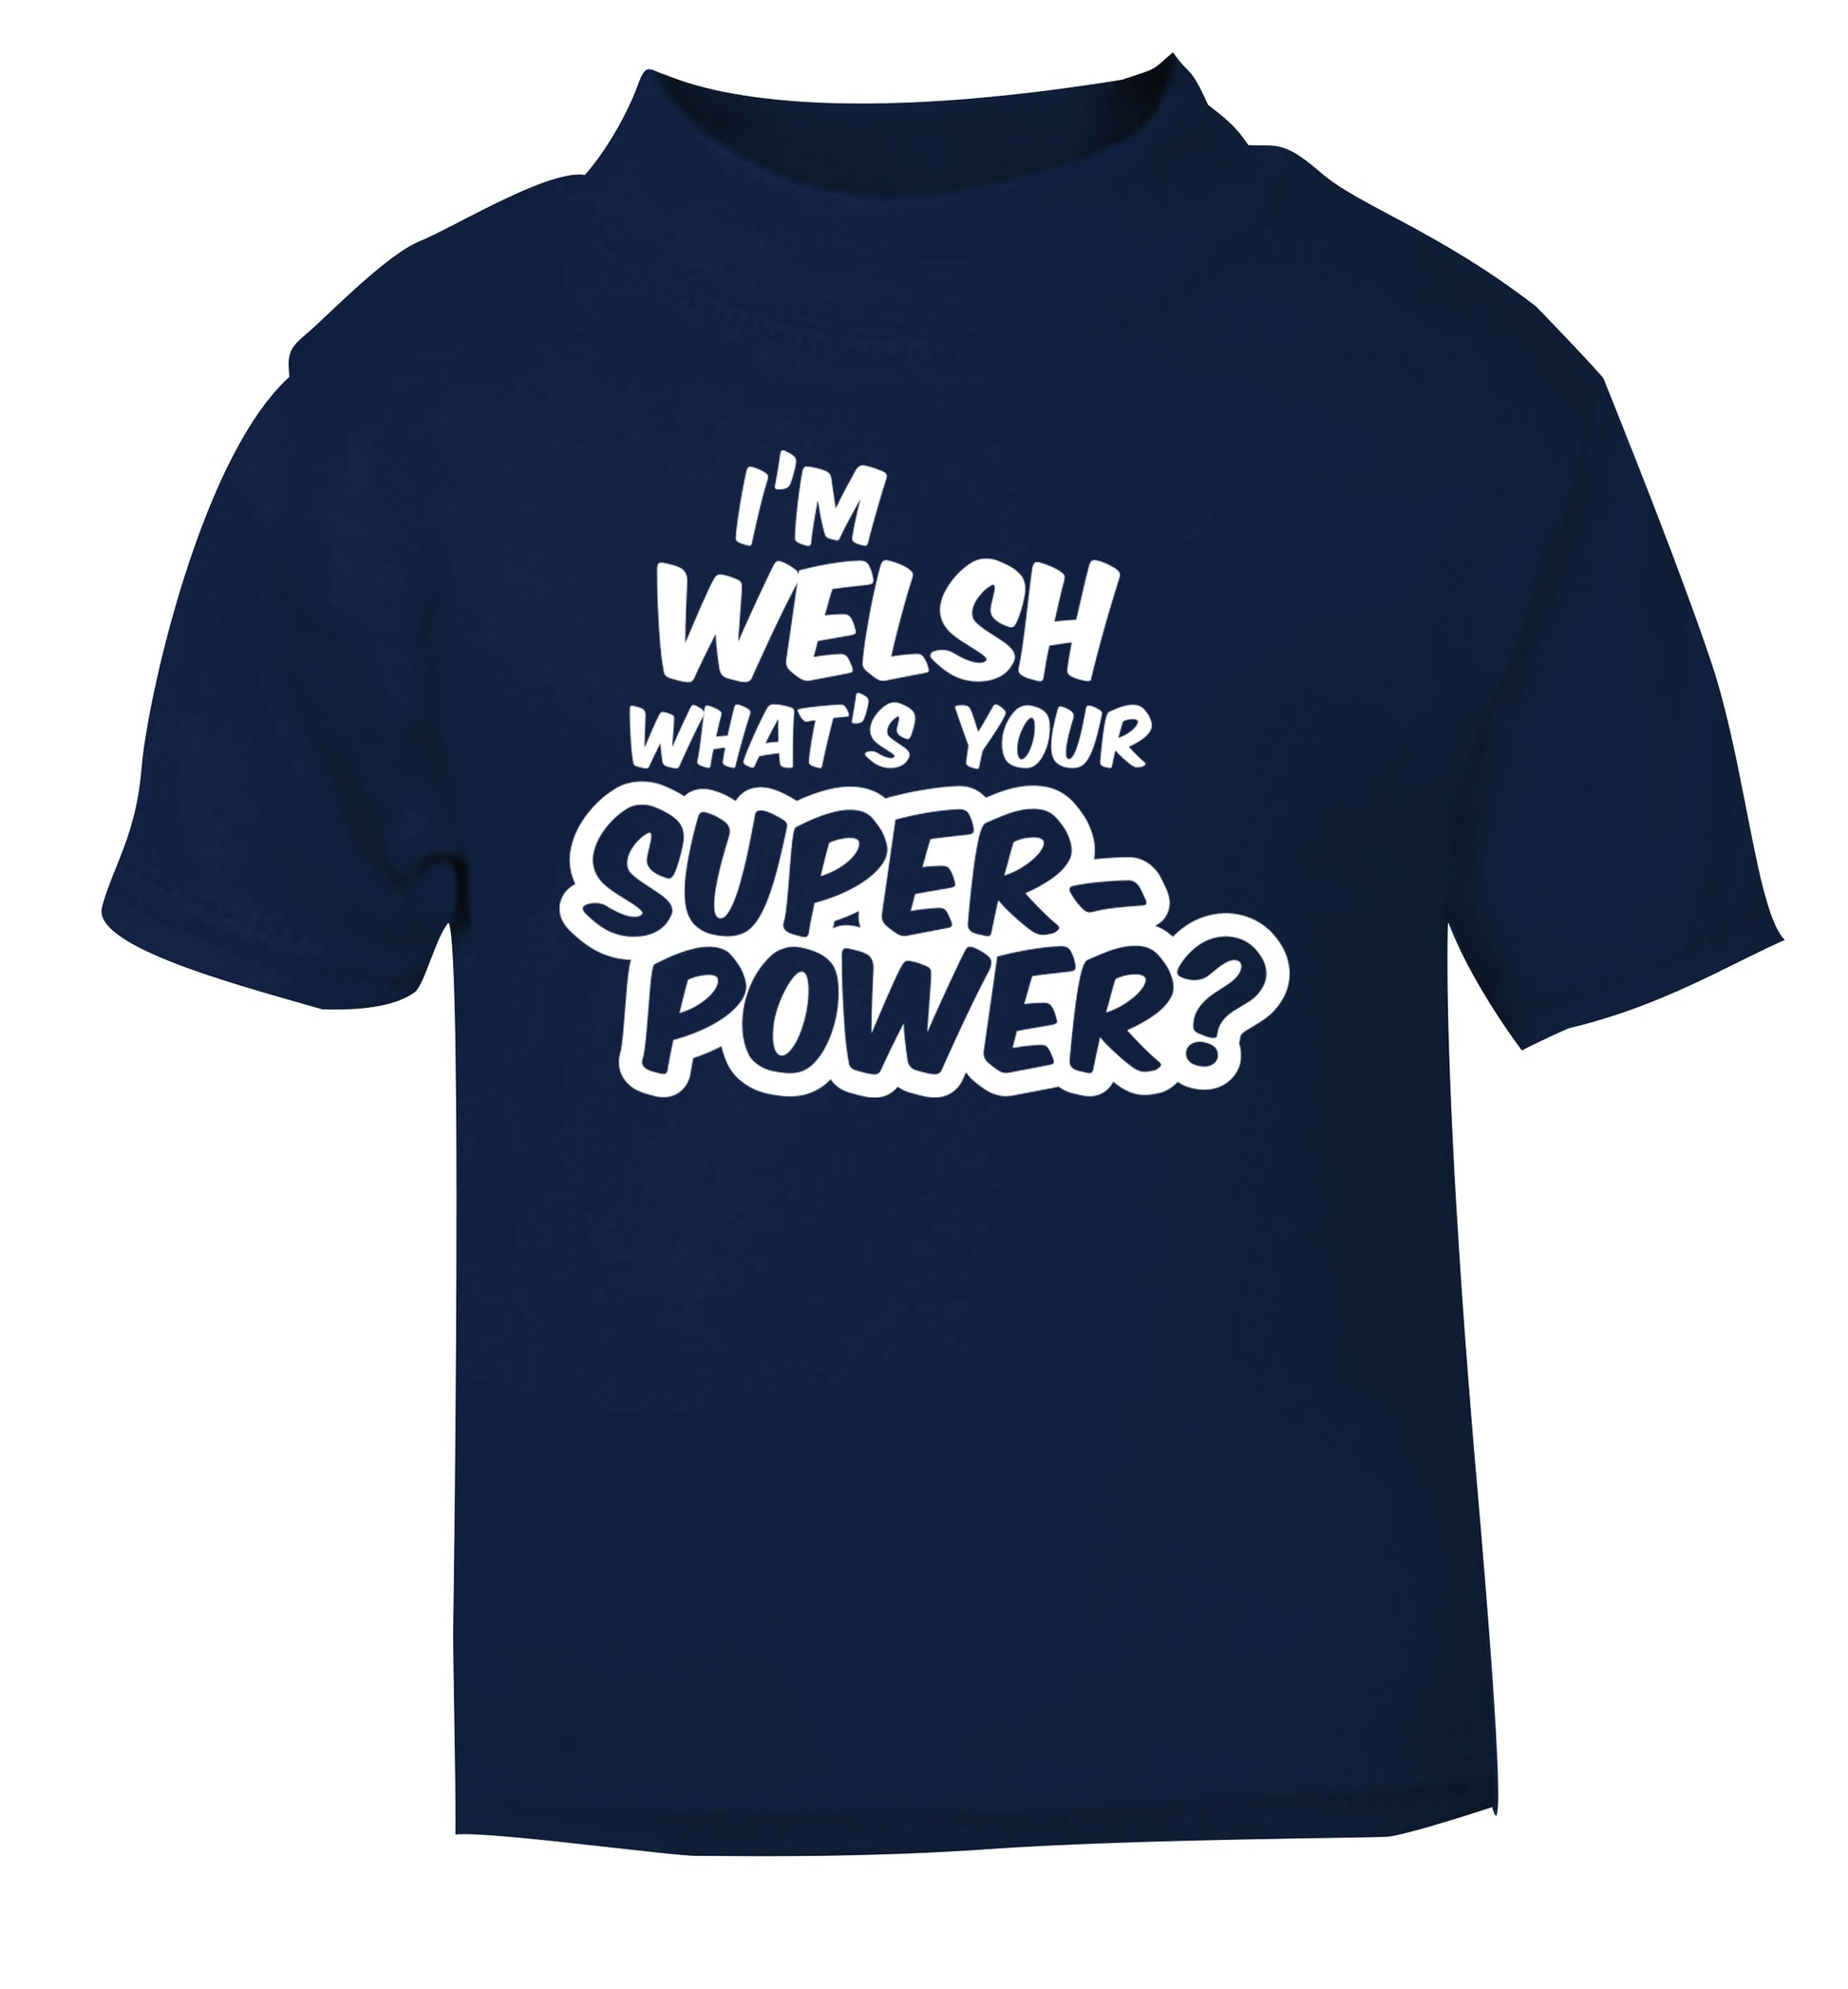 I'm Welsh what's your superpower? navy Baby Toddler Tshirt 2 Years